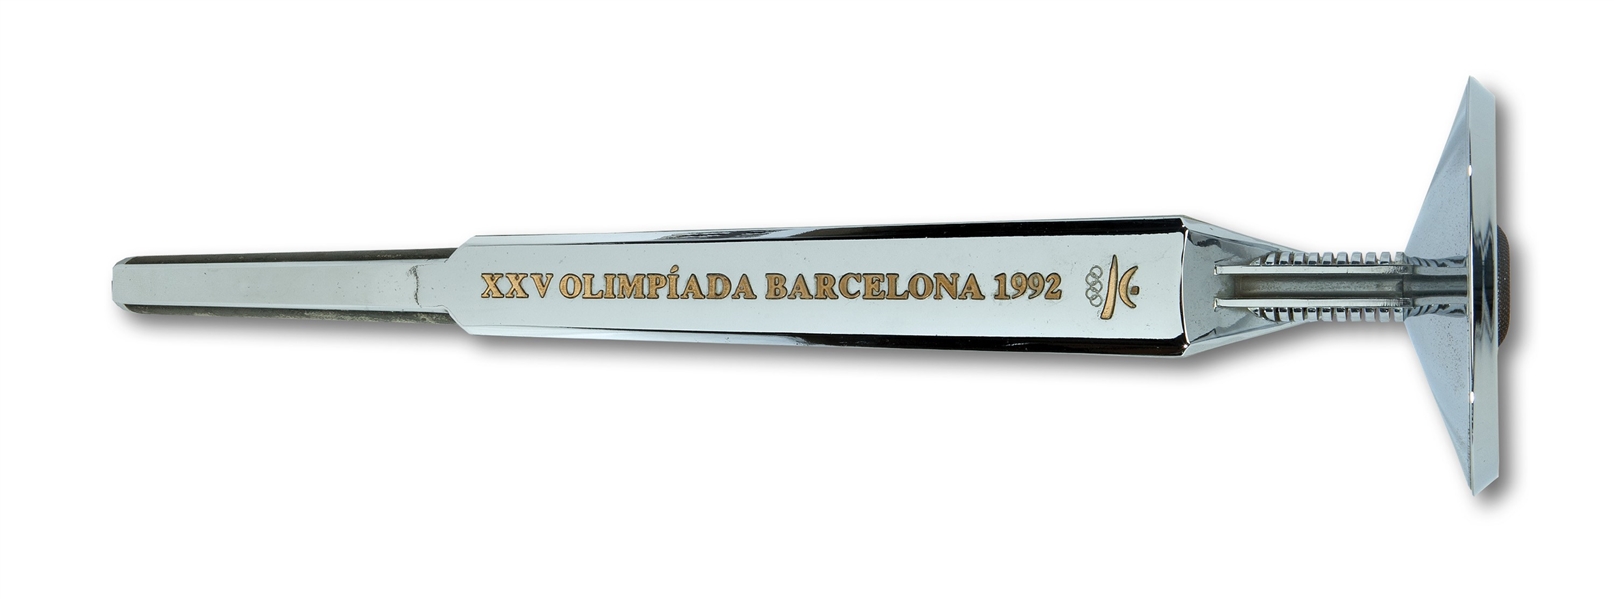 1992 BARCELONA SUMMER OLYMPIC GAMES TORCH (USED)